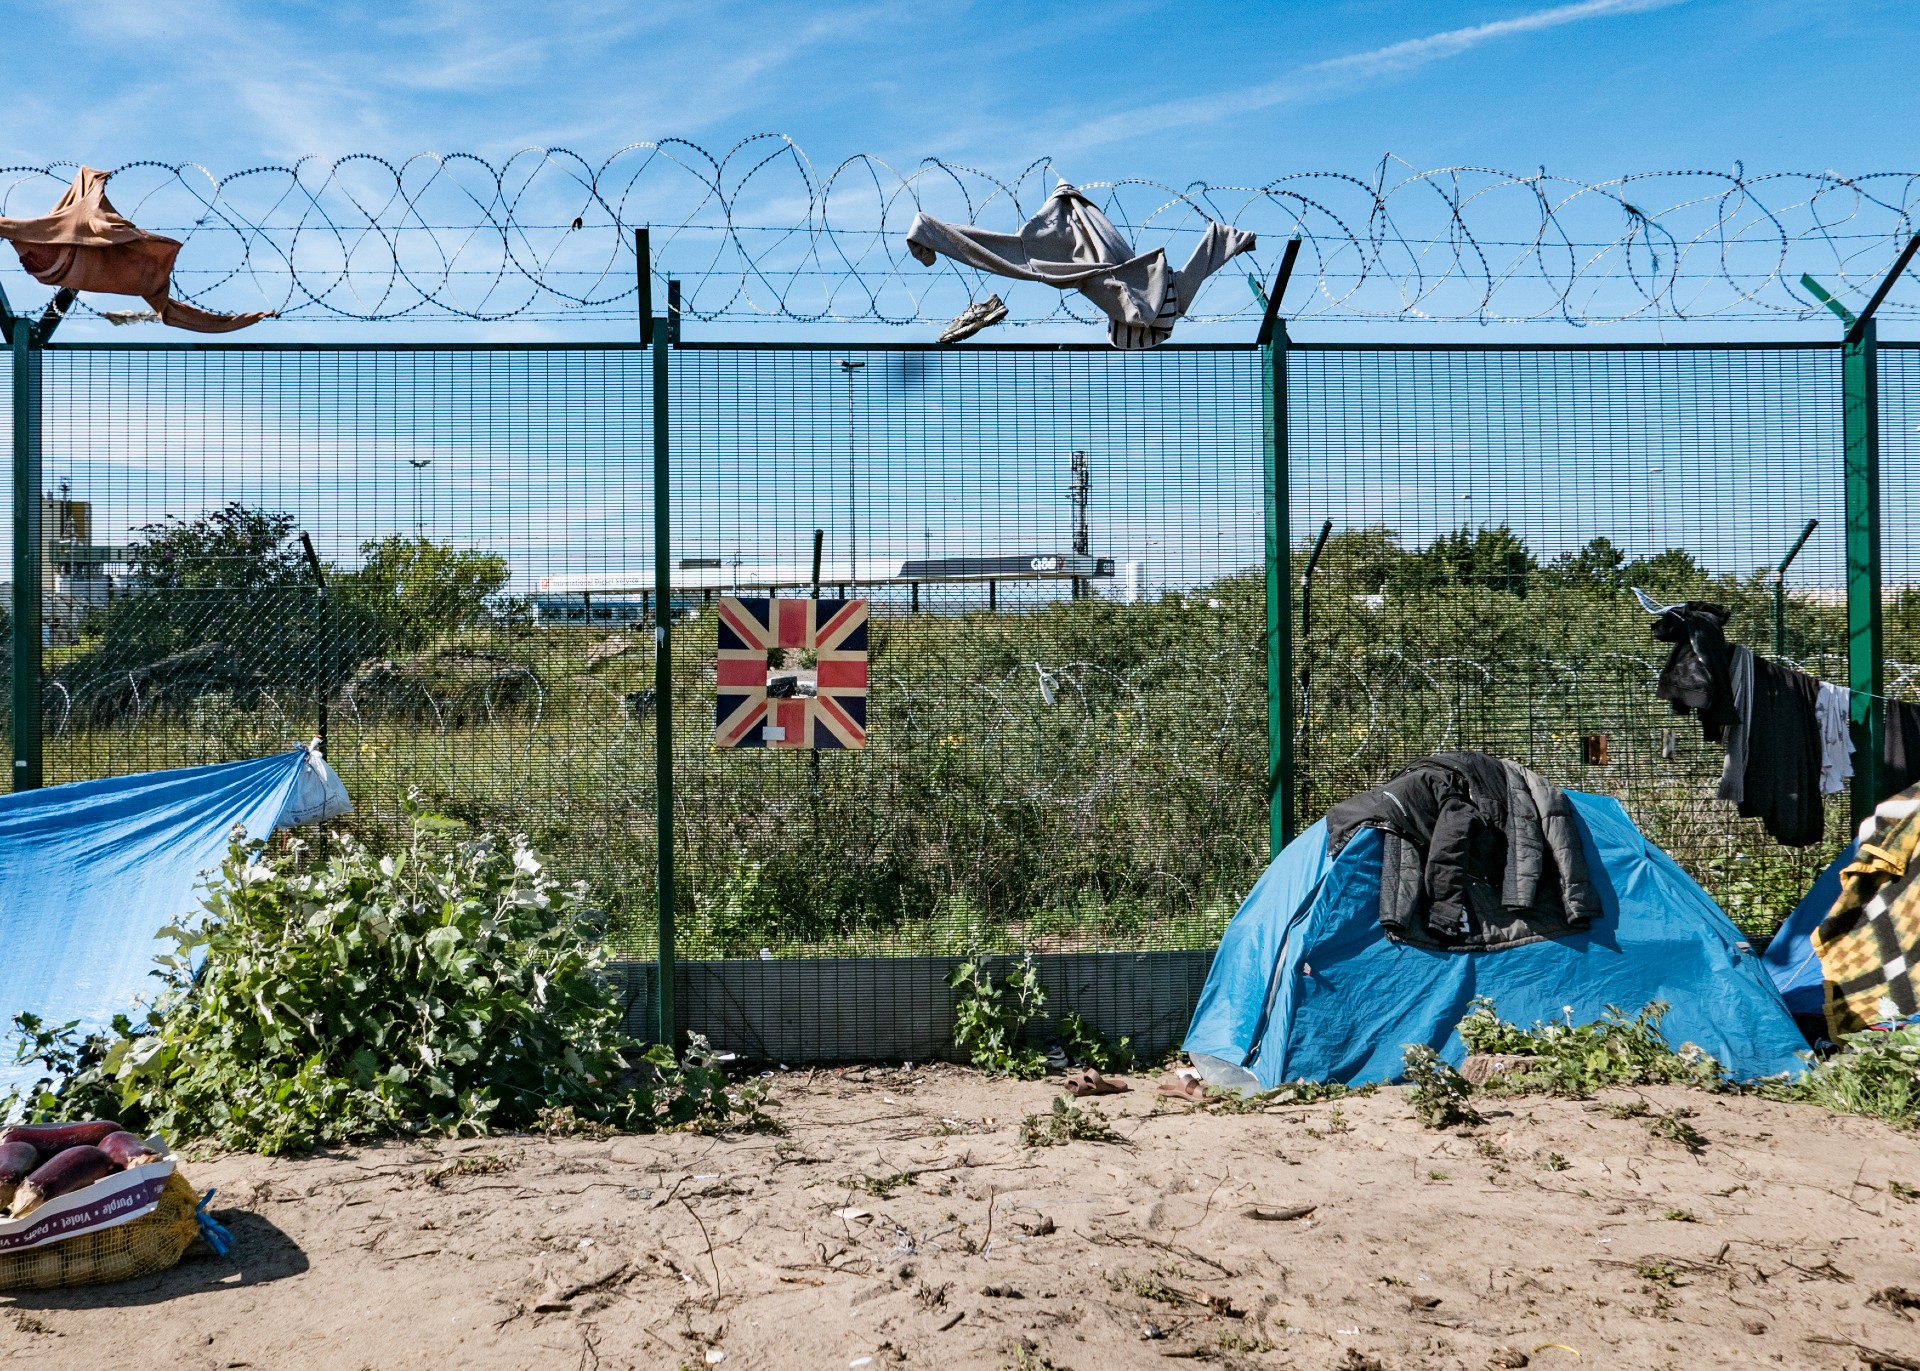 Refugee tents seen near the French-British border at Calais (MEE/Abdul Saboor)